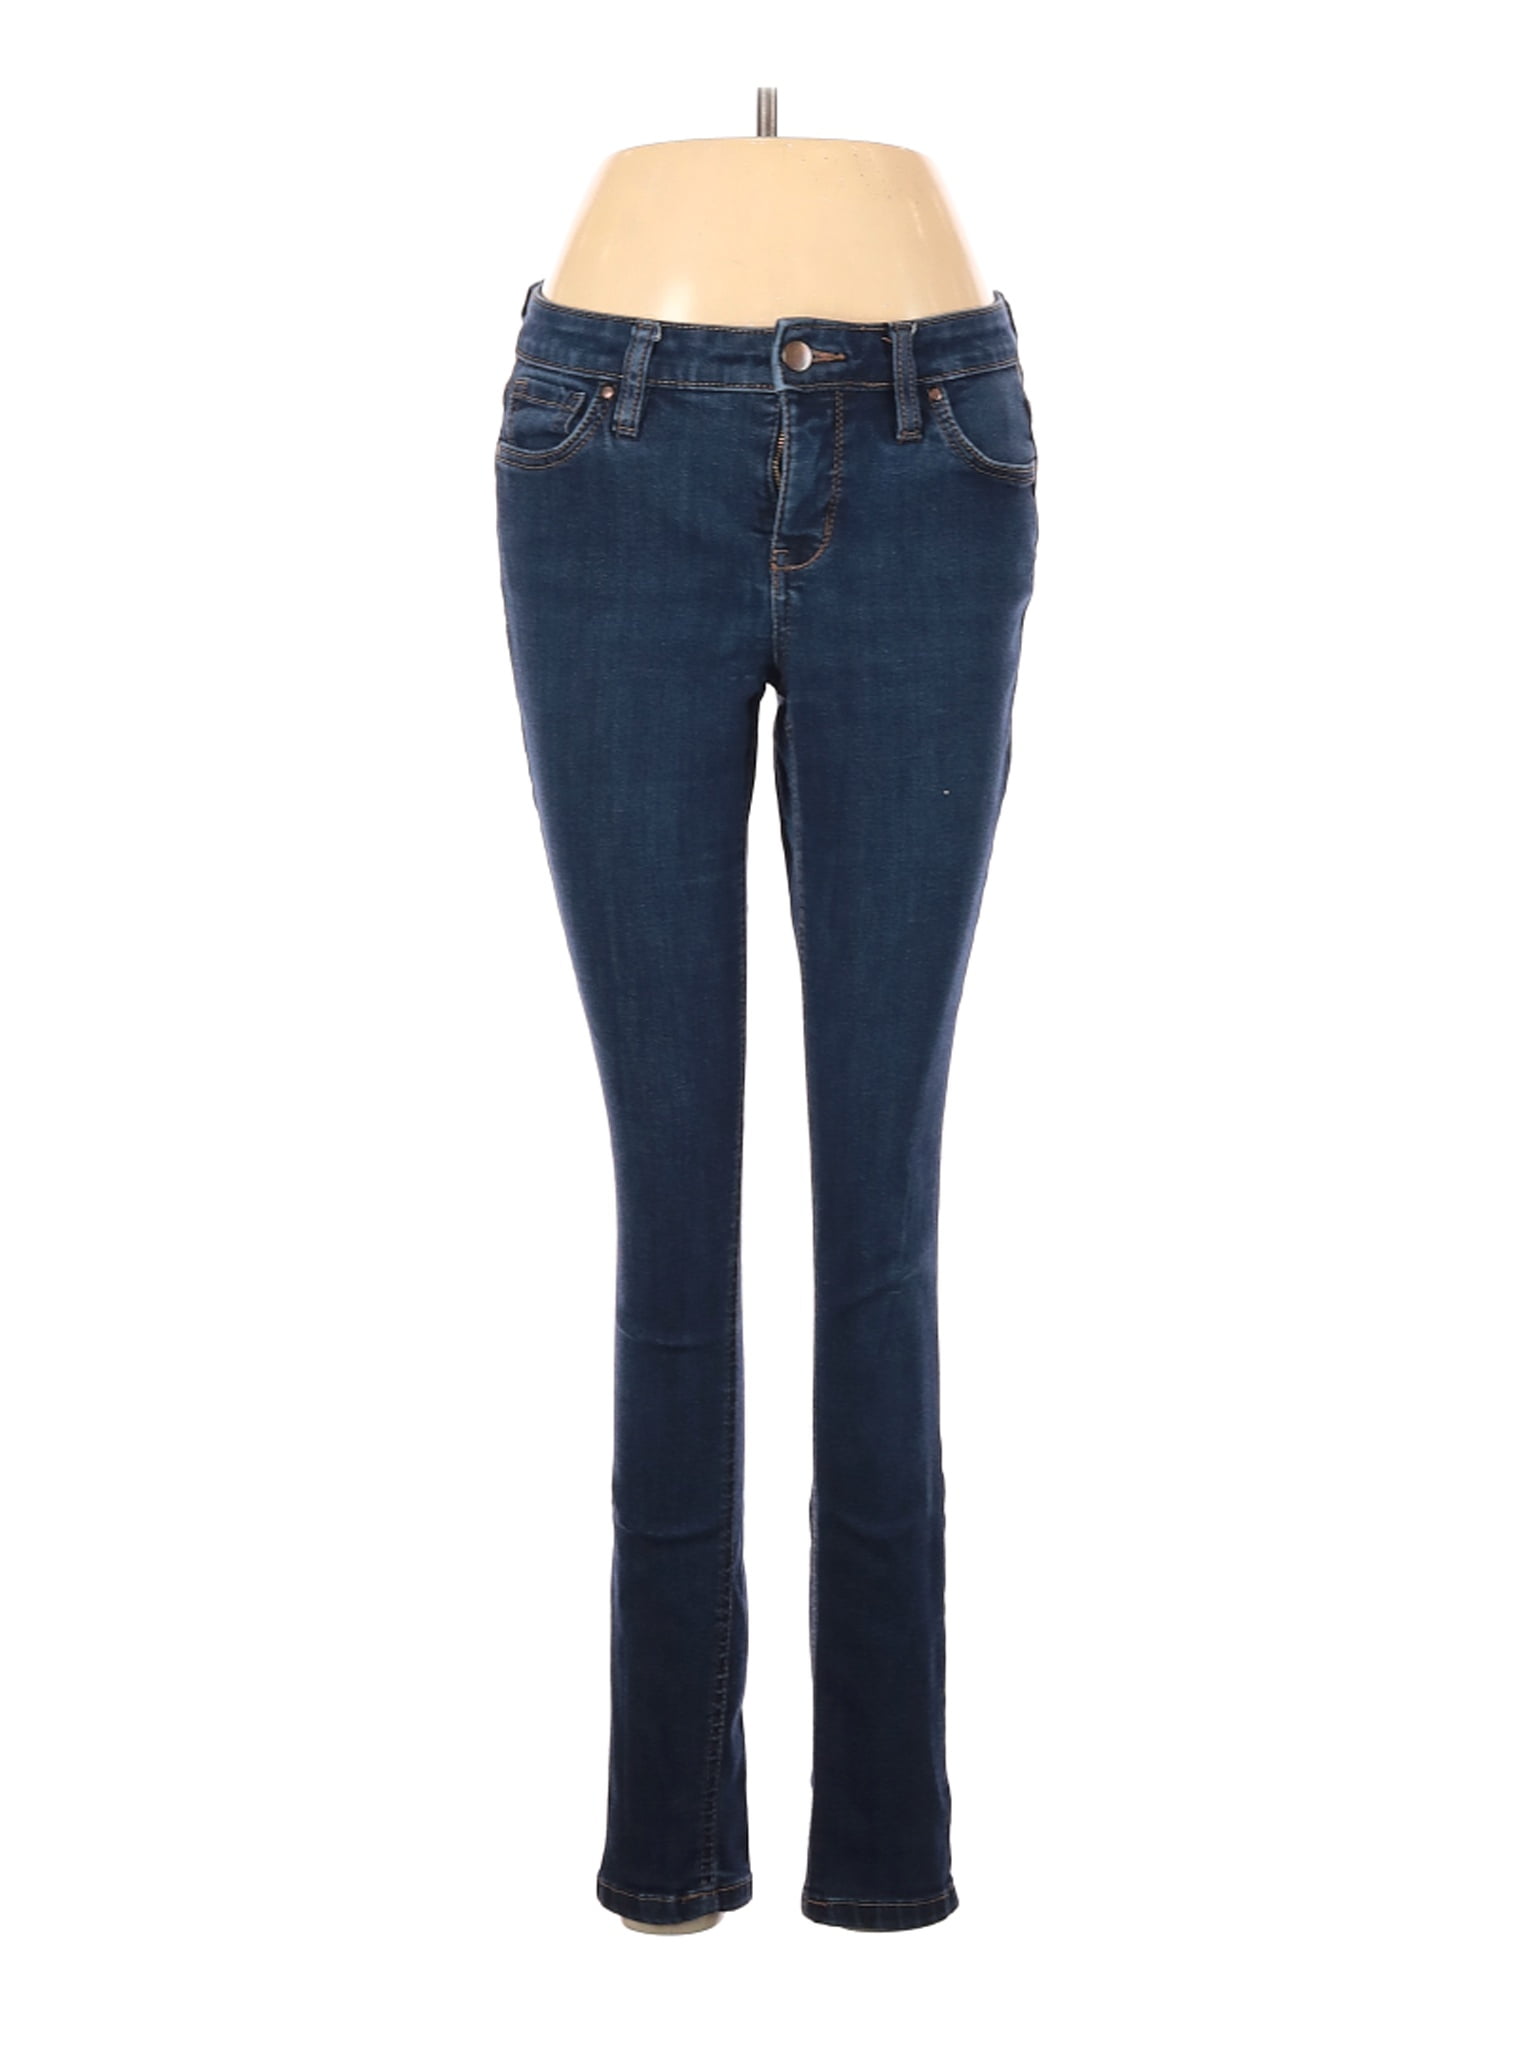 crown and ivy jeans